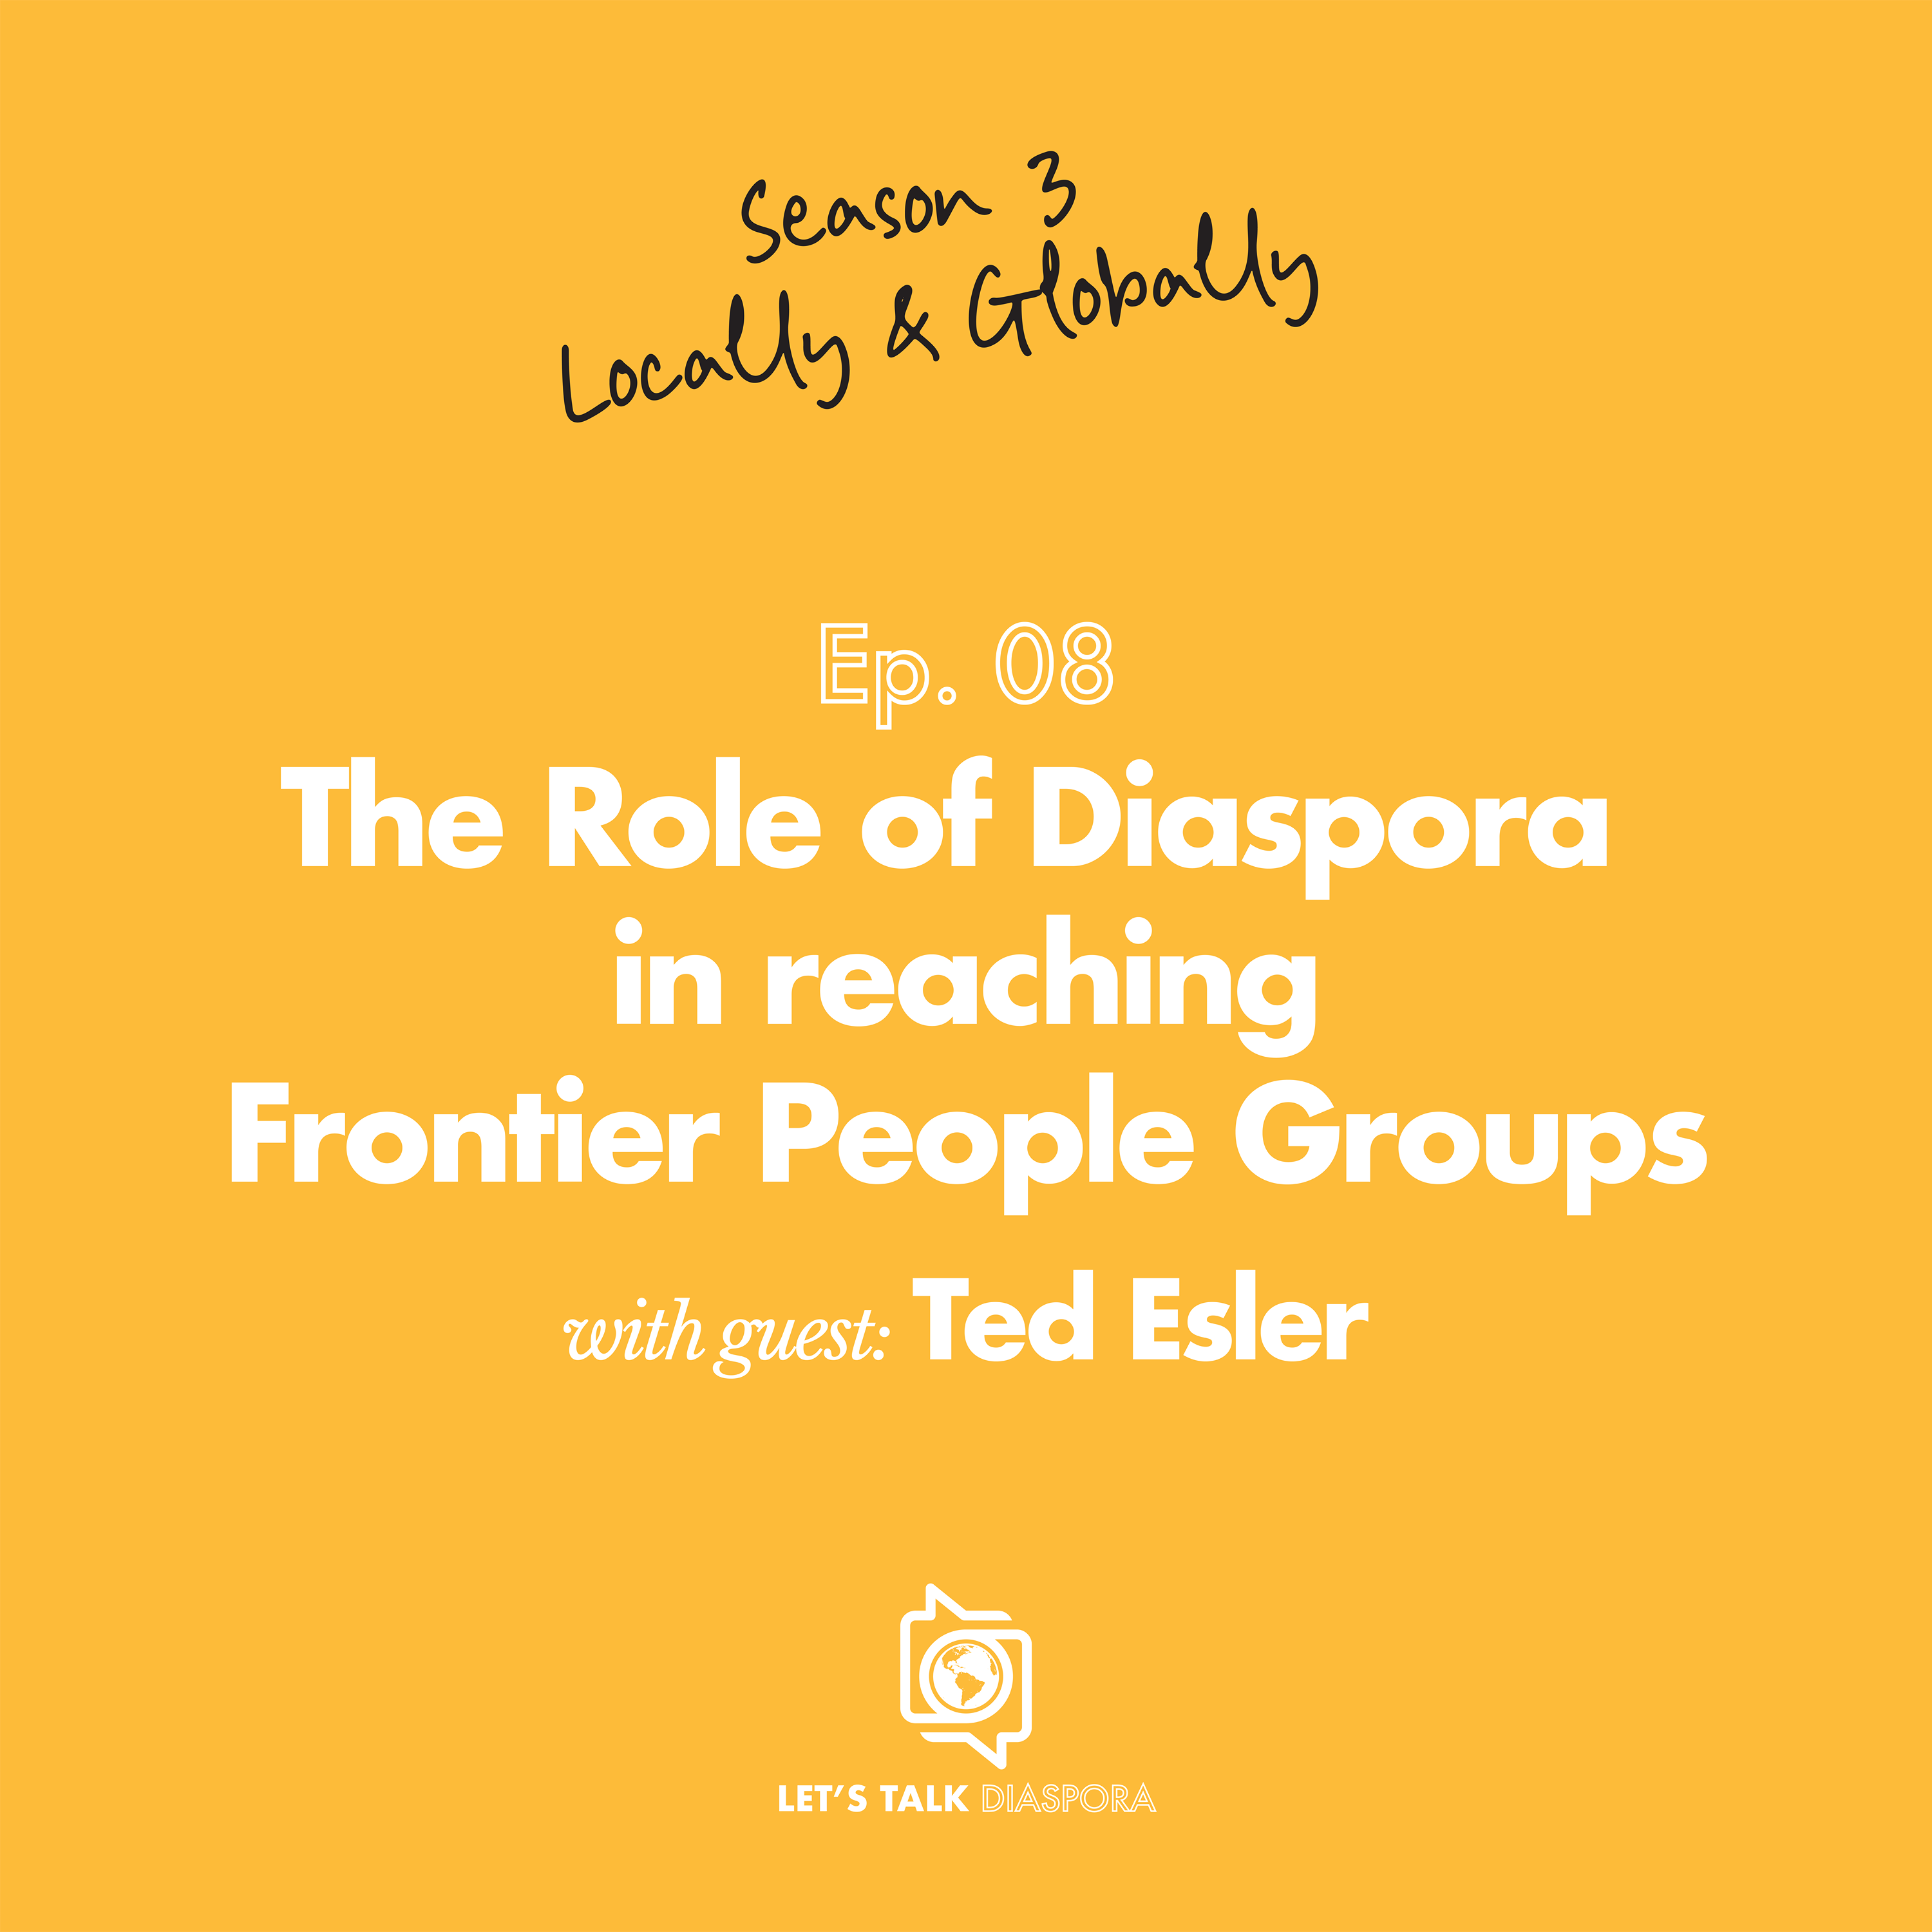 The Role of Diaspora in Reaching Frontier People Groups